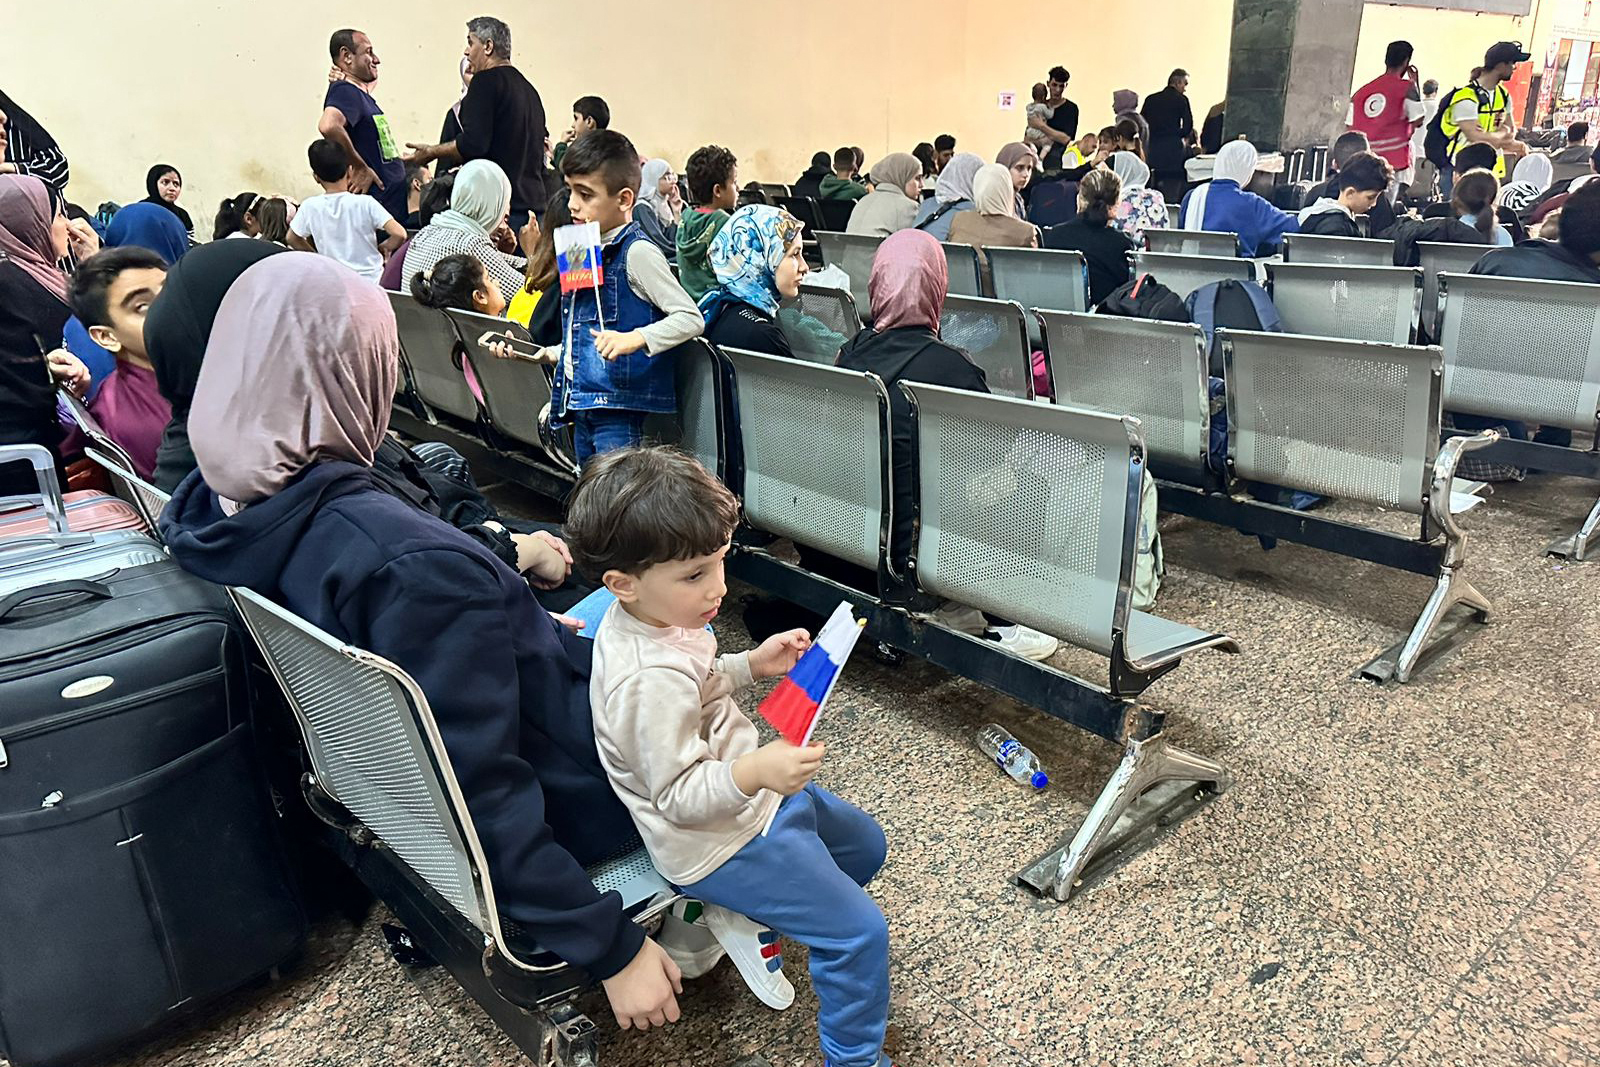 Foreign nationals wait for their papers to be processed on the Egyptian side of the Rafah crossing after fleeing the Gaza Strip. /AFP